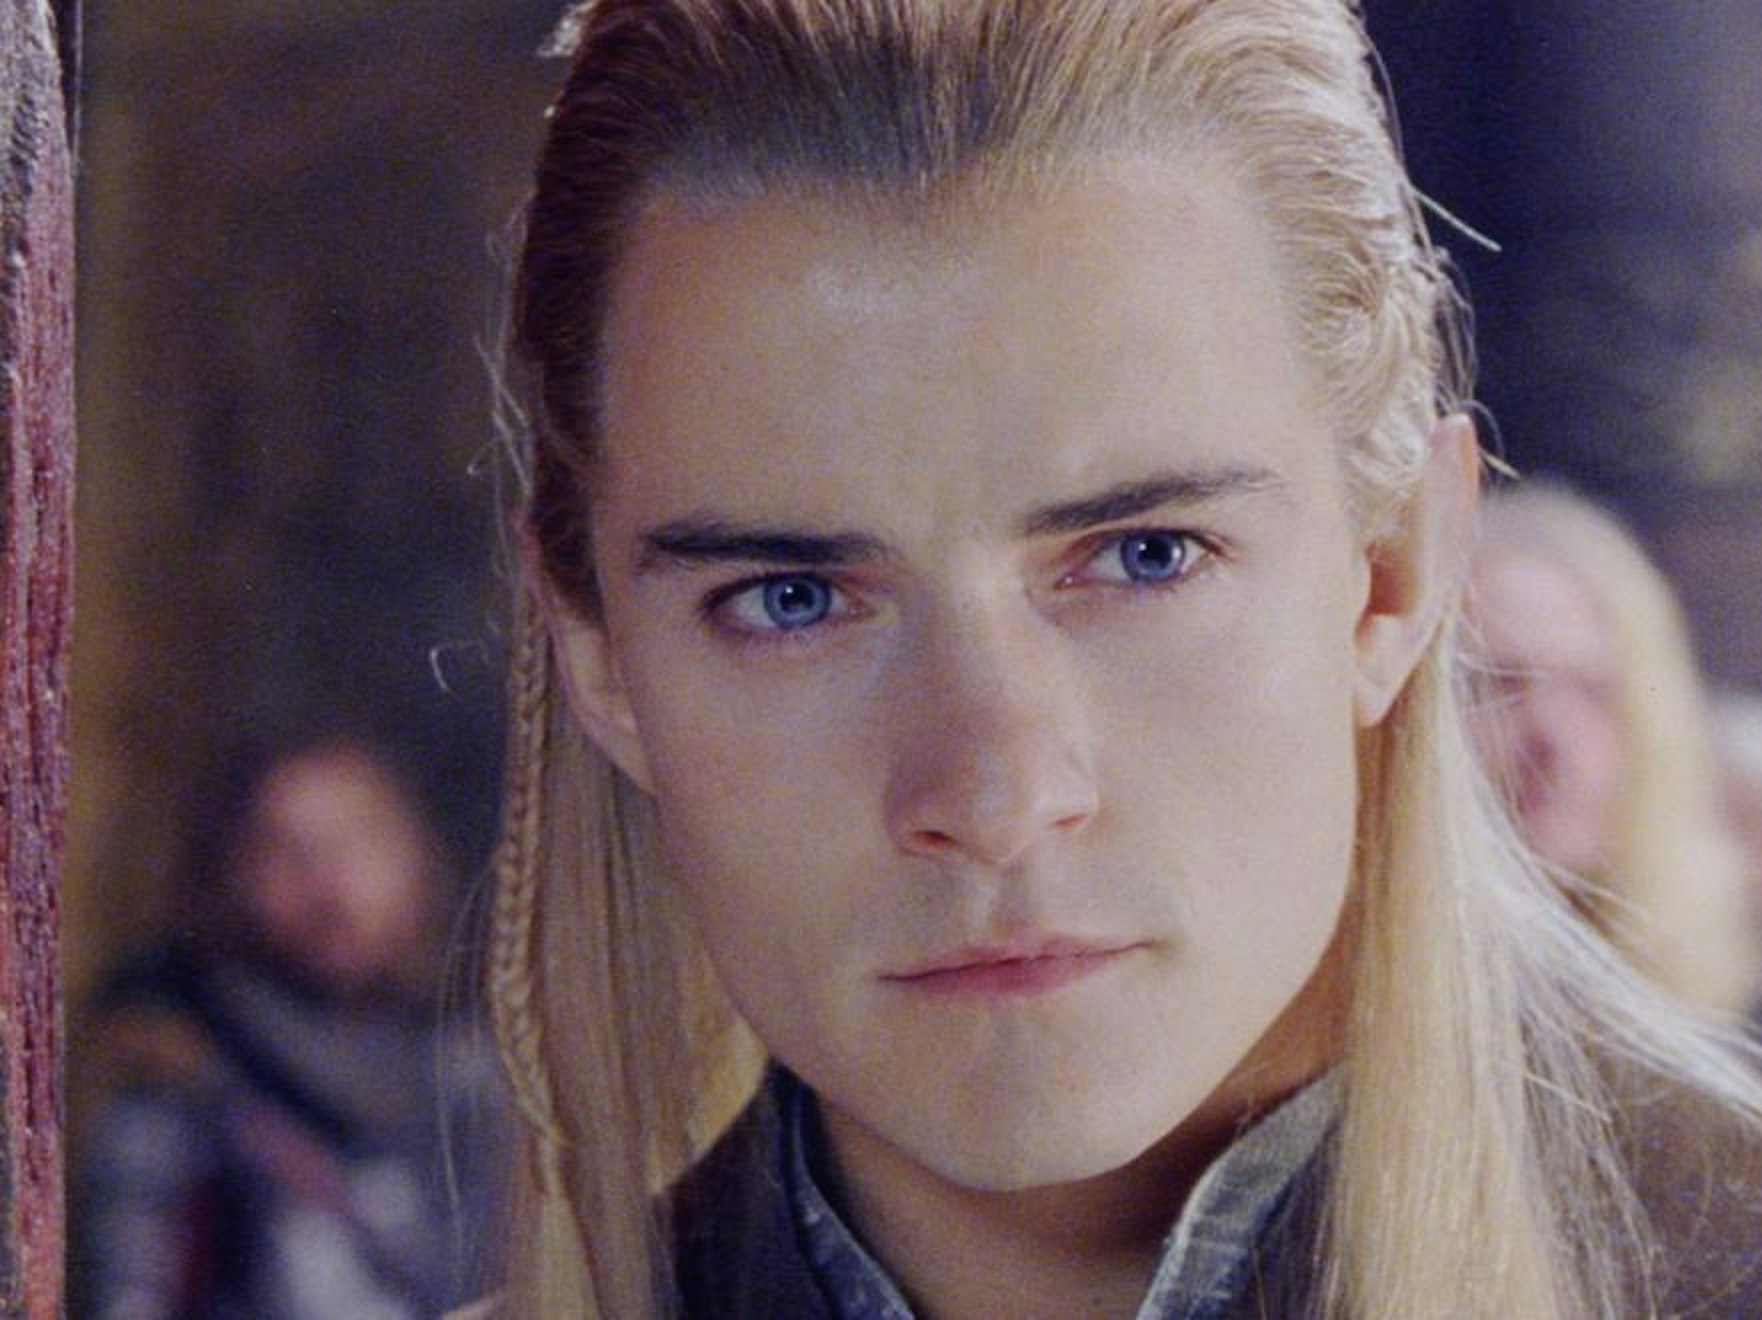 Orlando Bloom is Already Finished Filming The Hobbit 